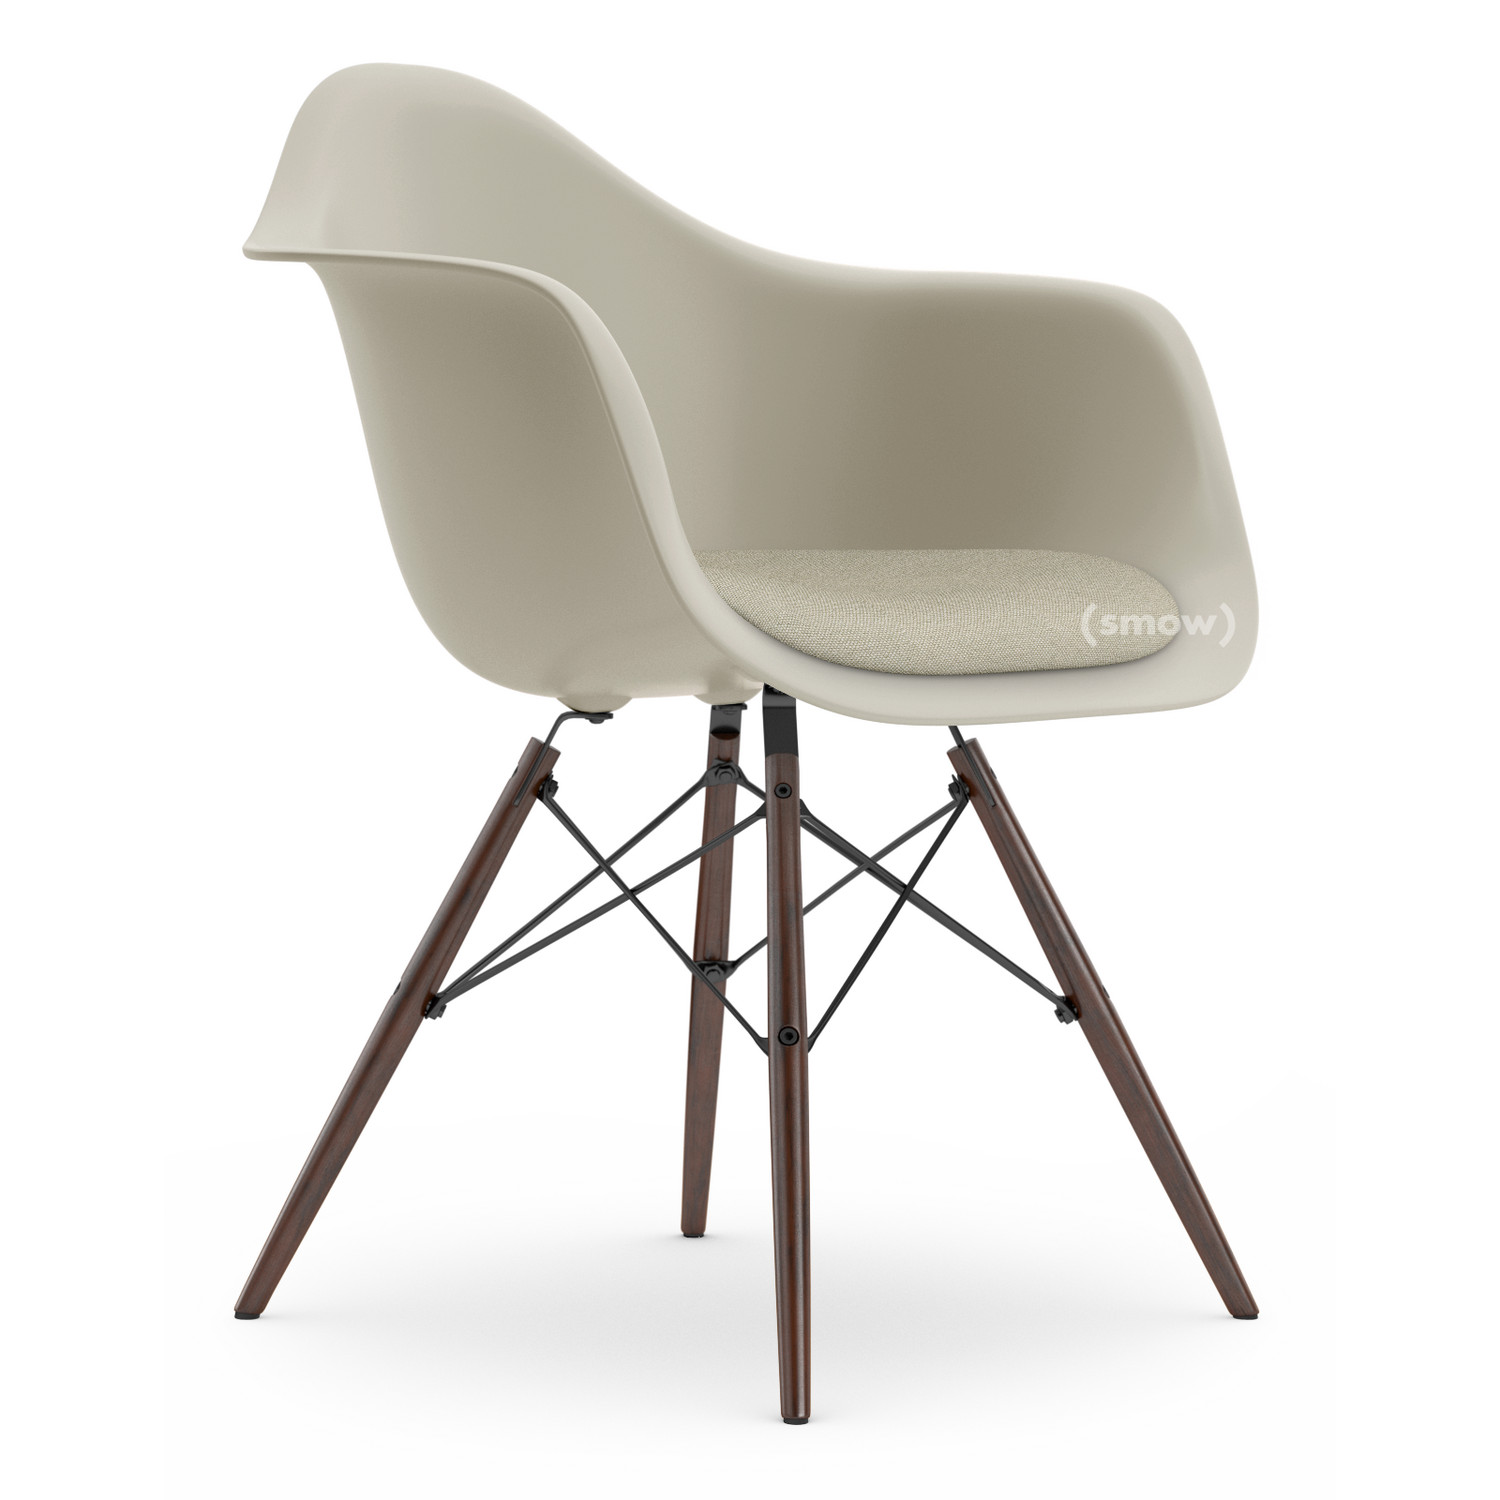 aanwijzing Krijt Verhuizer Vitra Eames Plastic Armchair DAW, Pebble, With seat upholstery, Warm grey /  ivory, Standard version - 43 cm, Dark maple by Charles & Ray Eames, 1950 -  Designer furniture by smow.com